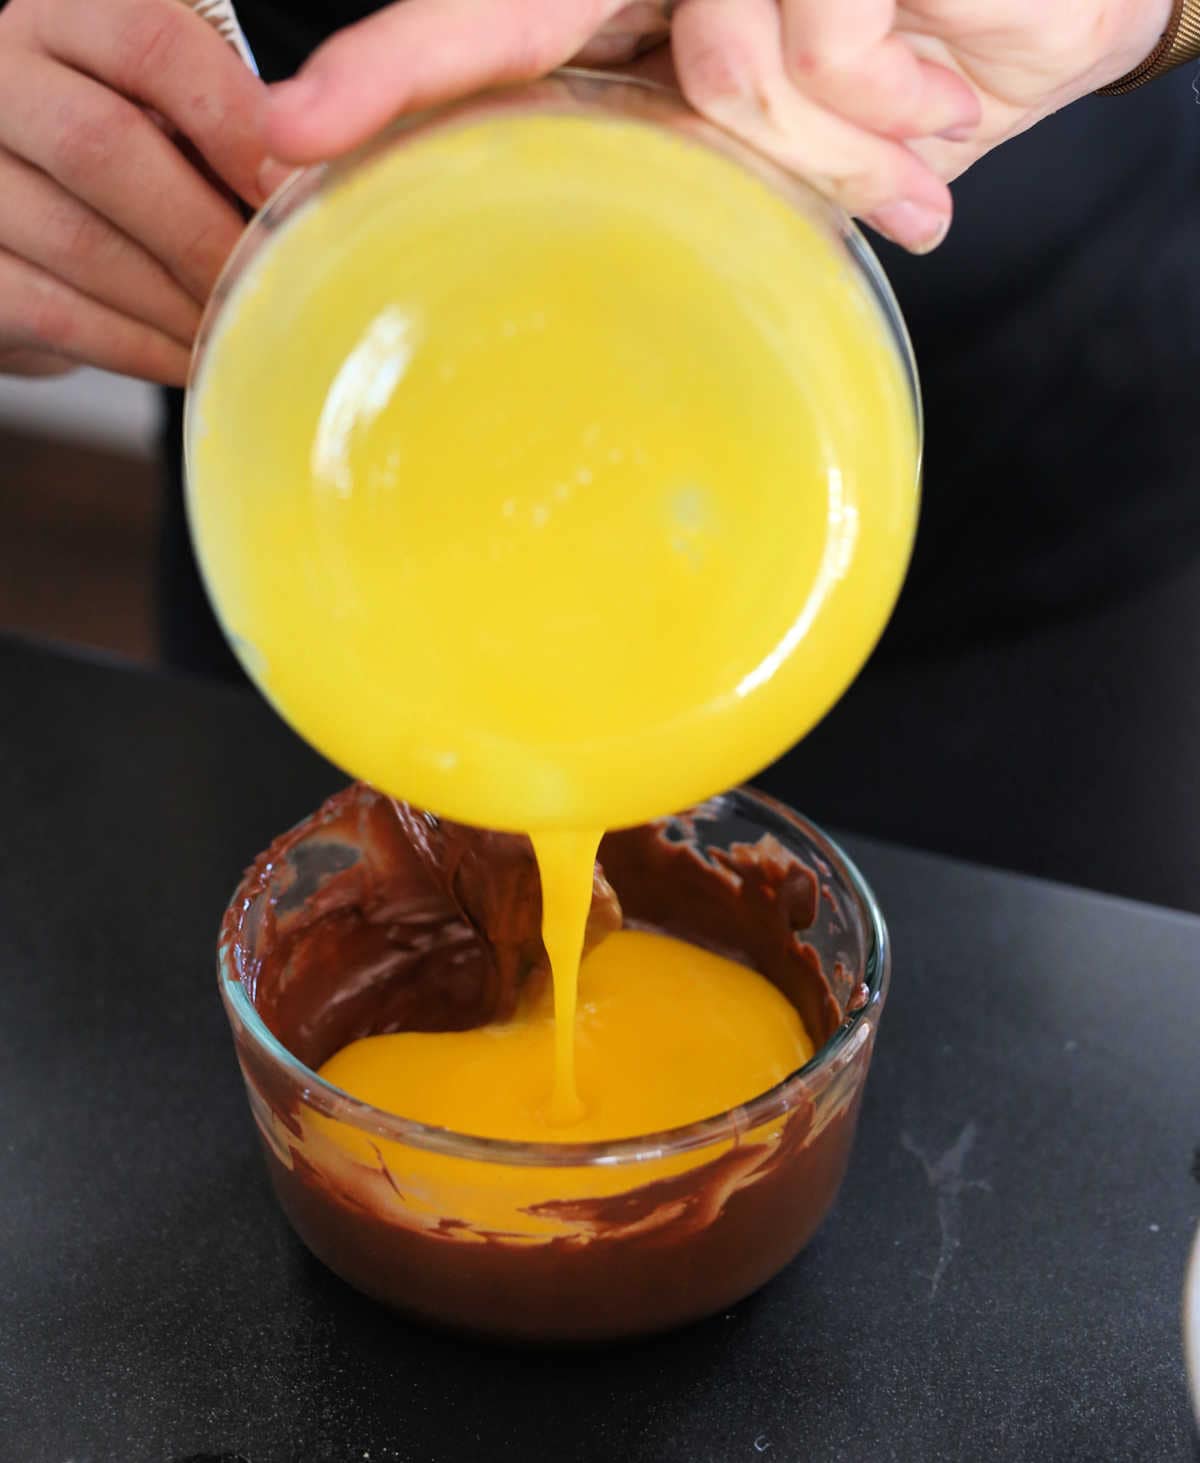 pouring eggs in melted chocolate